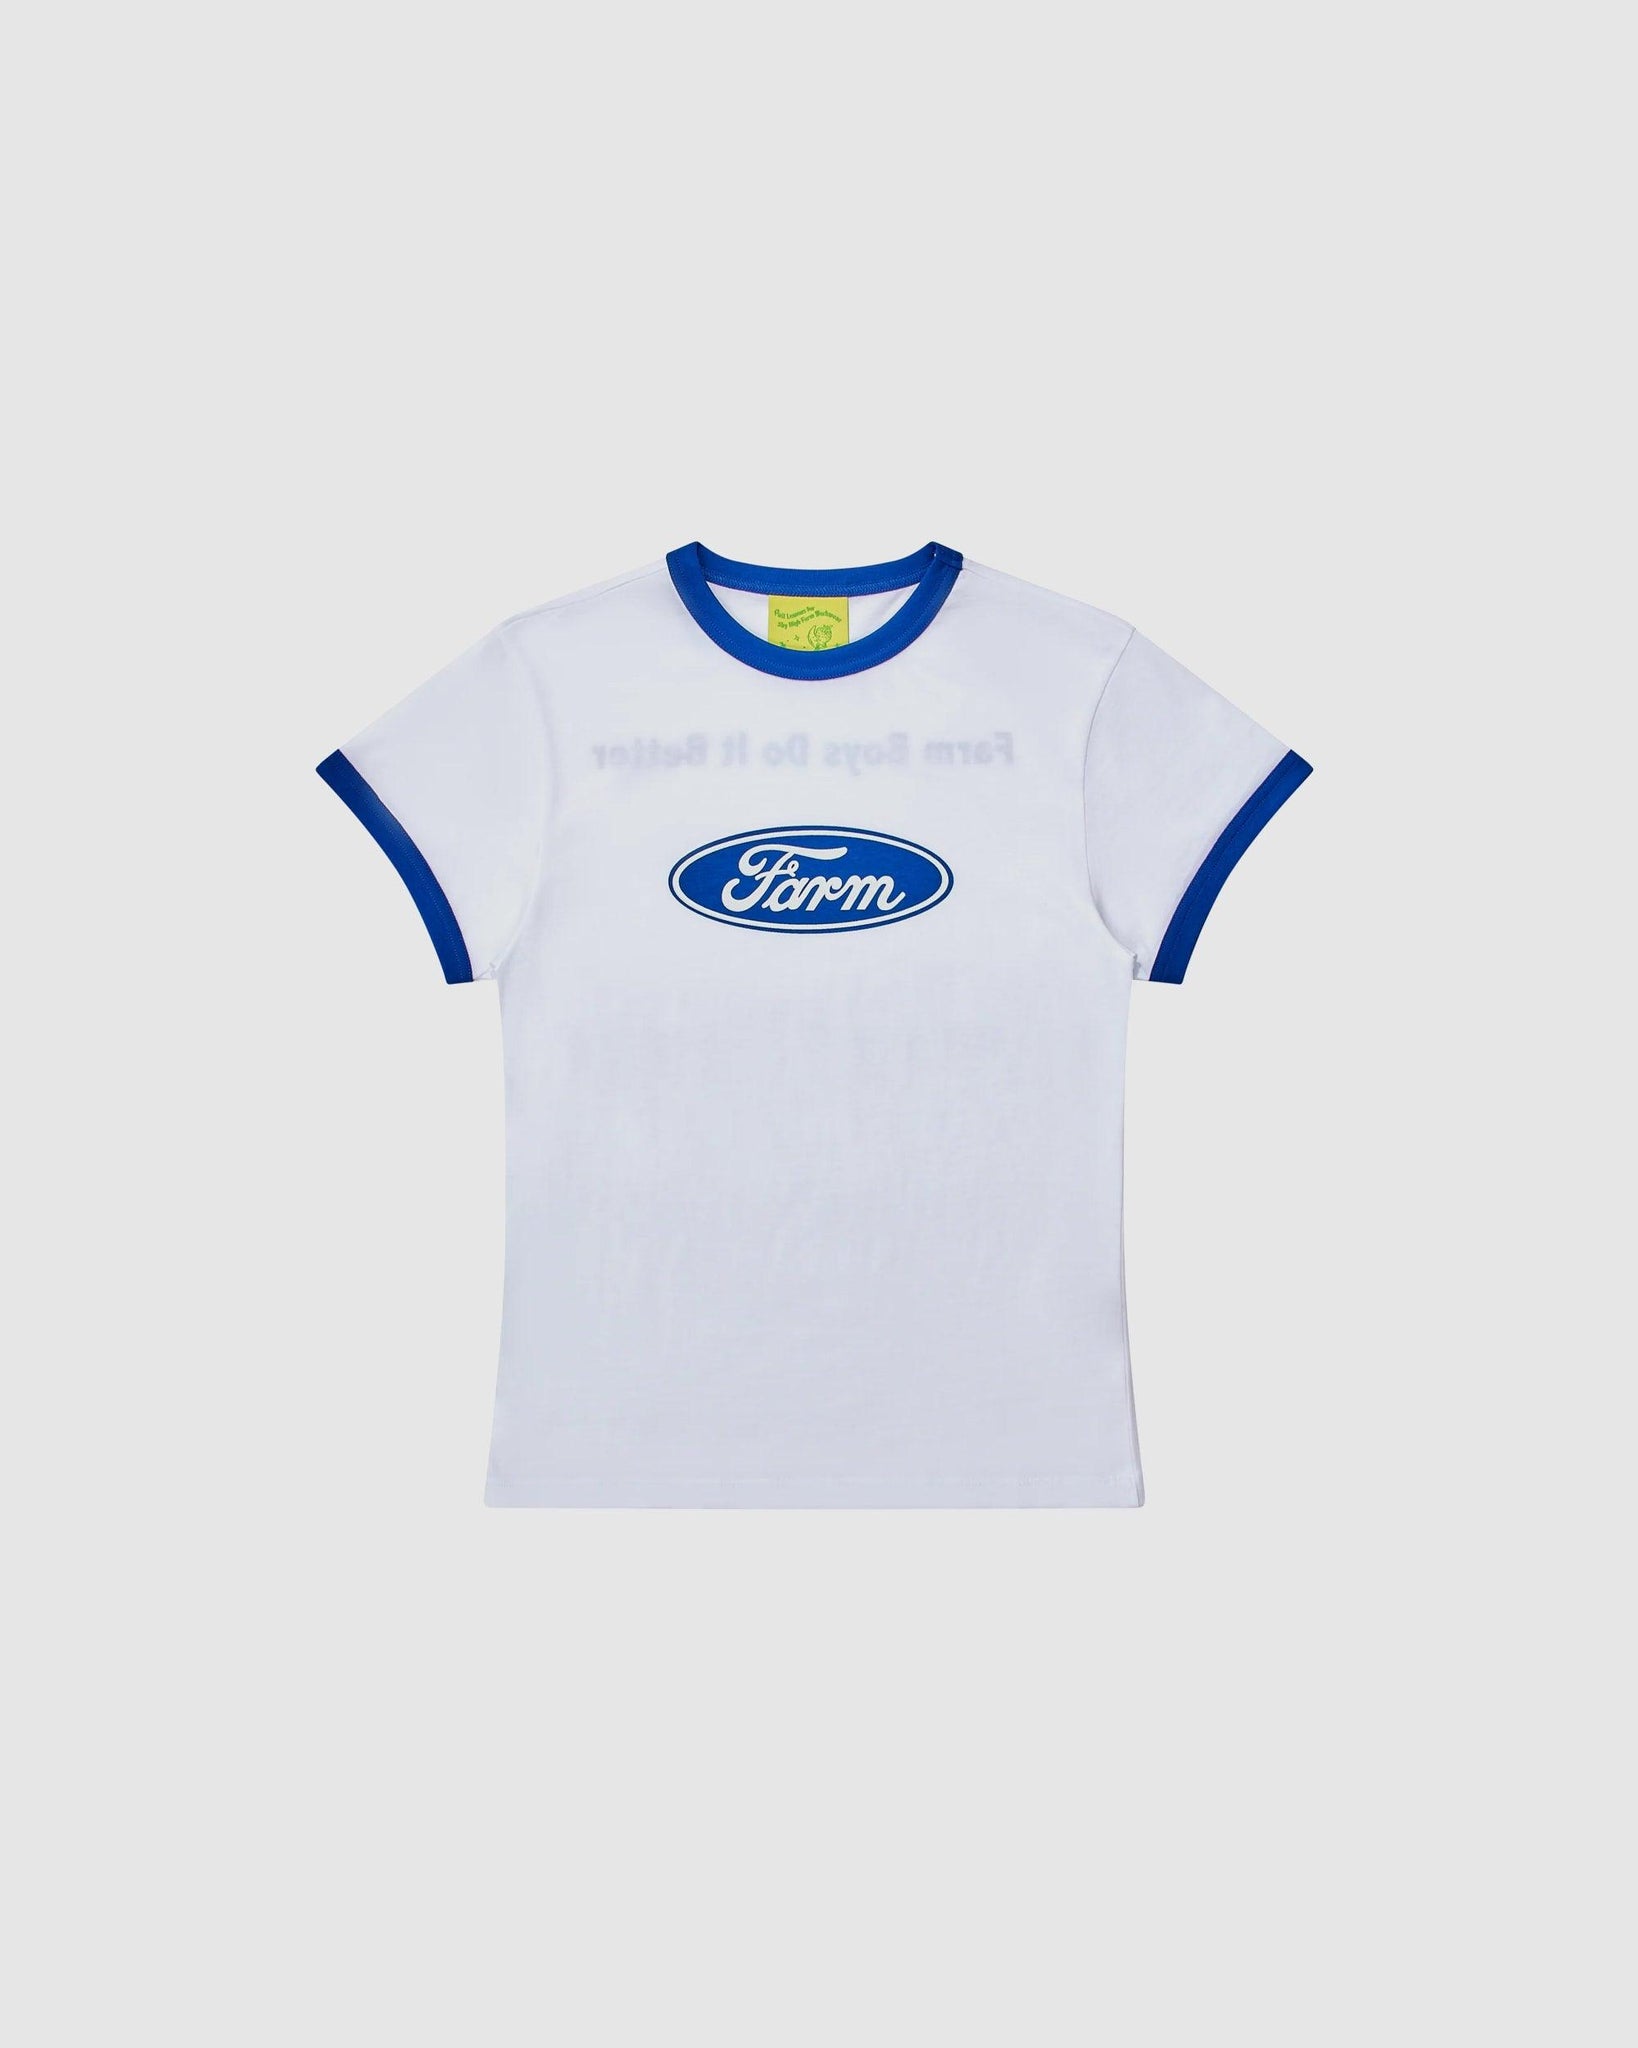 Quil Lemons Farm Tee - {{ collection.title }} - Chinatown Country Club 